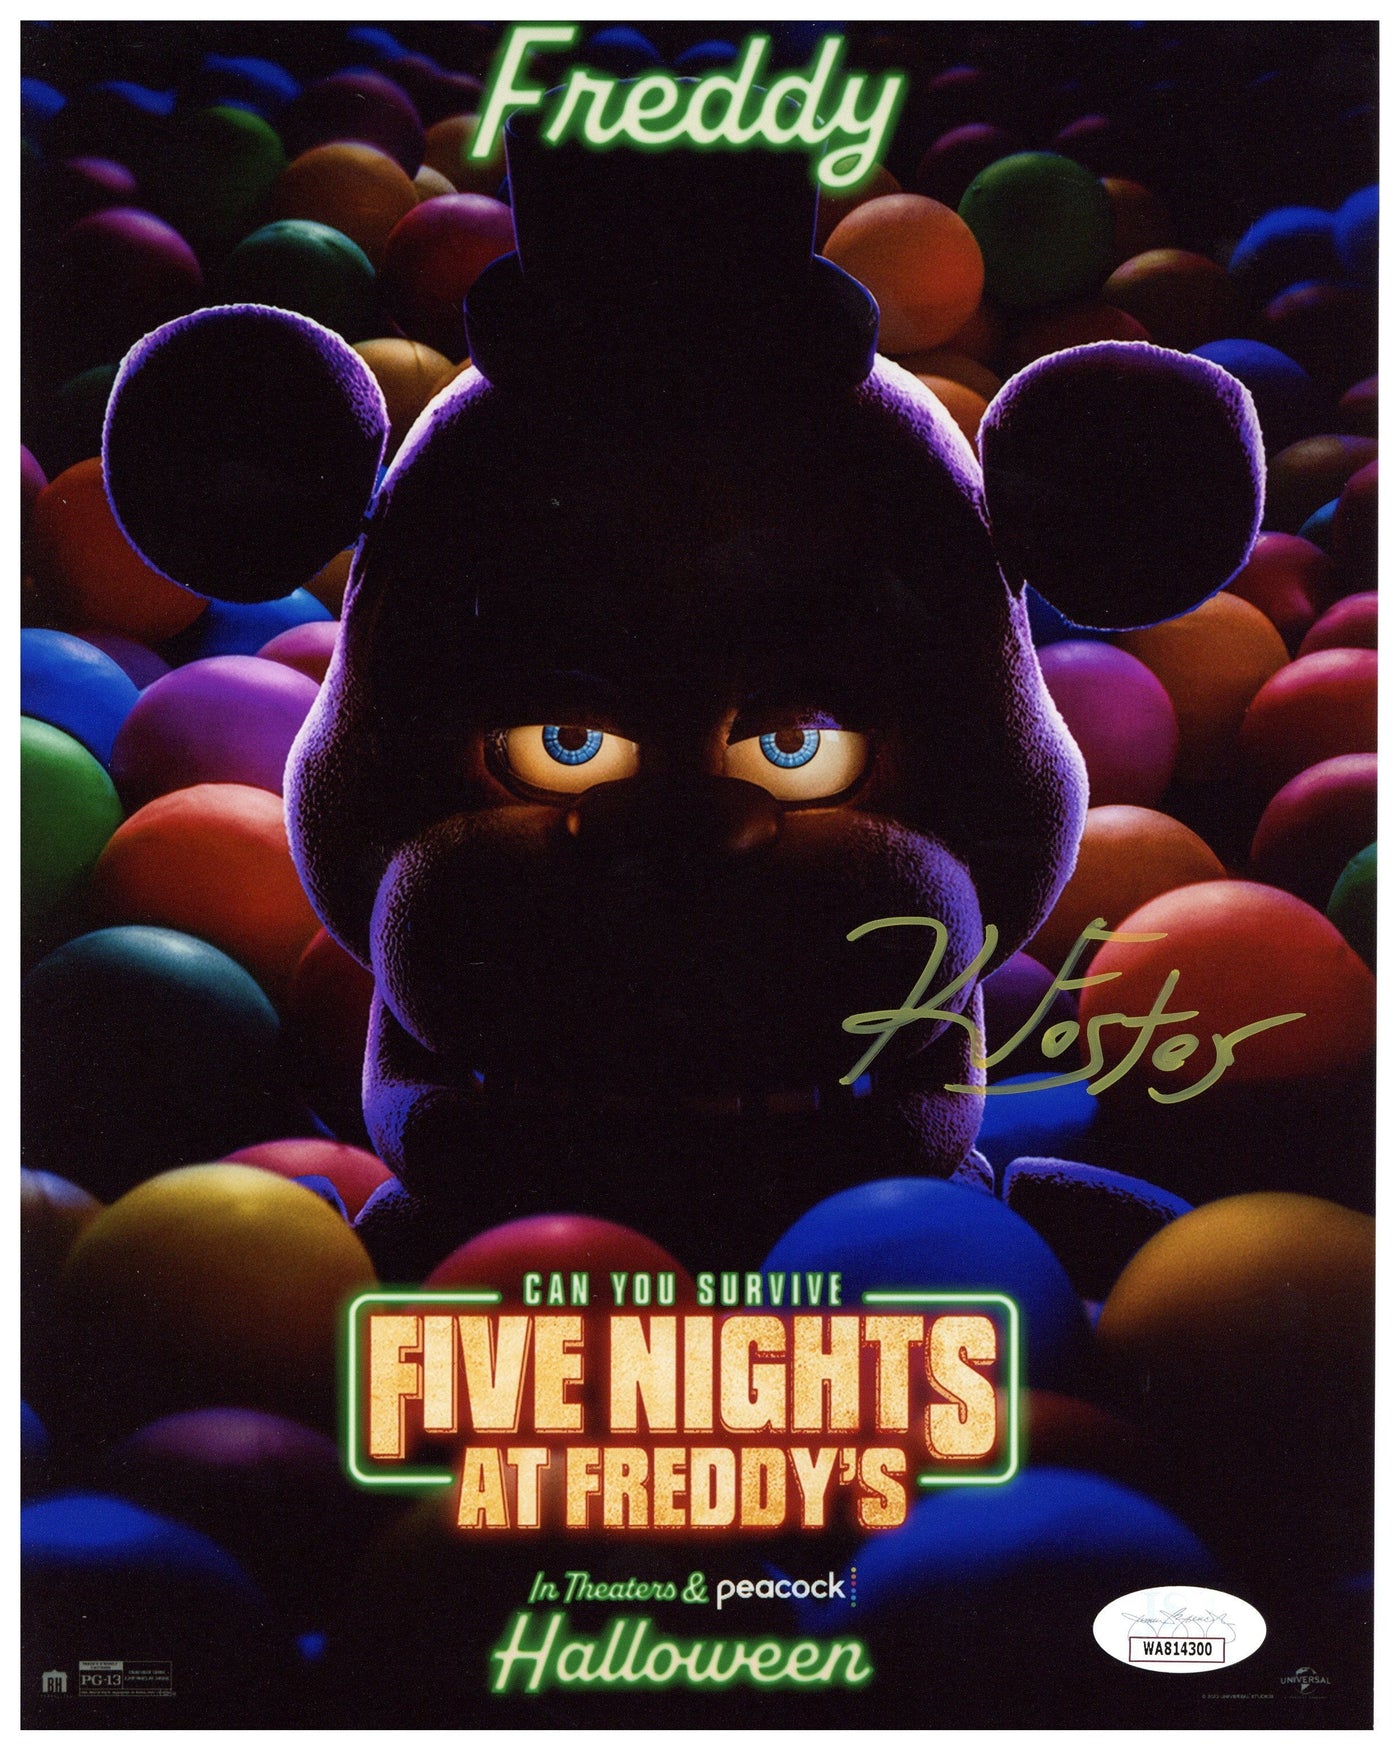 Kevin Foster Signed 8x10 Photo Five Nights at Freddy's Autographed JSA COA